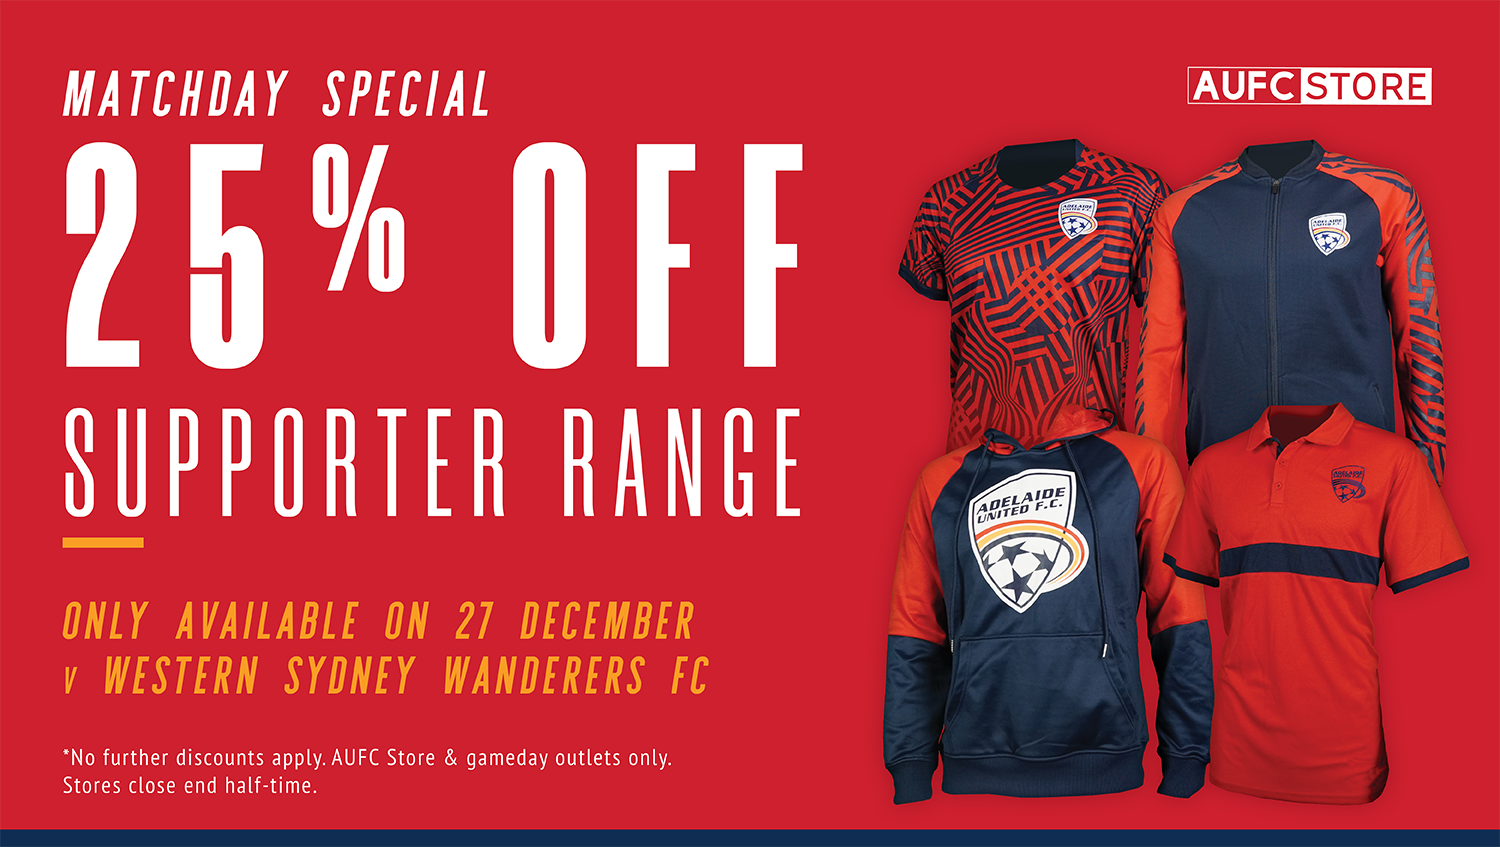 Adelaide United 25% Supporter Range - Game day only!